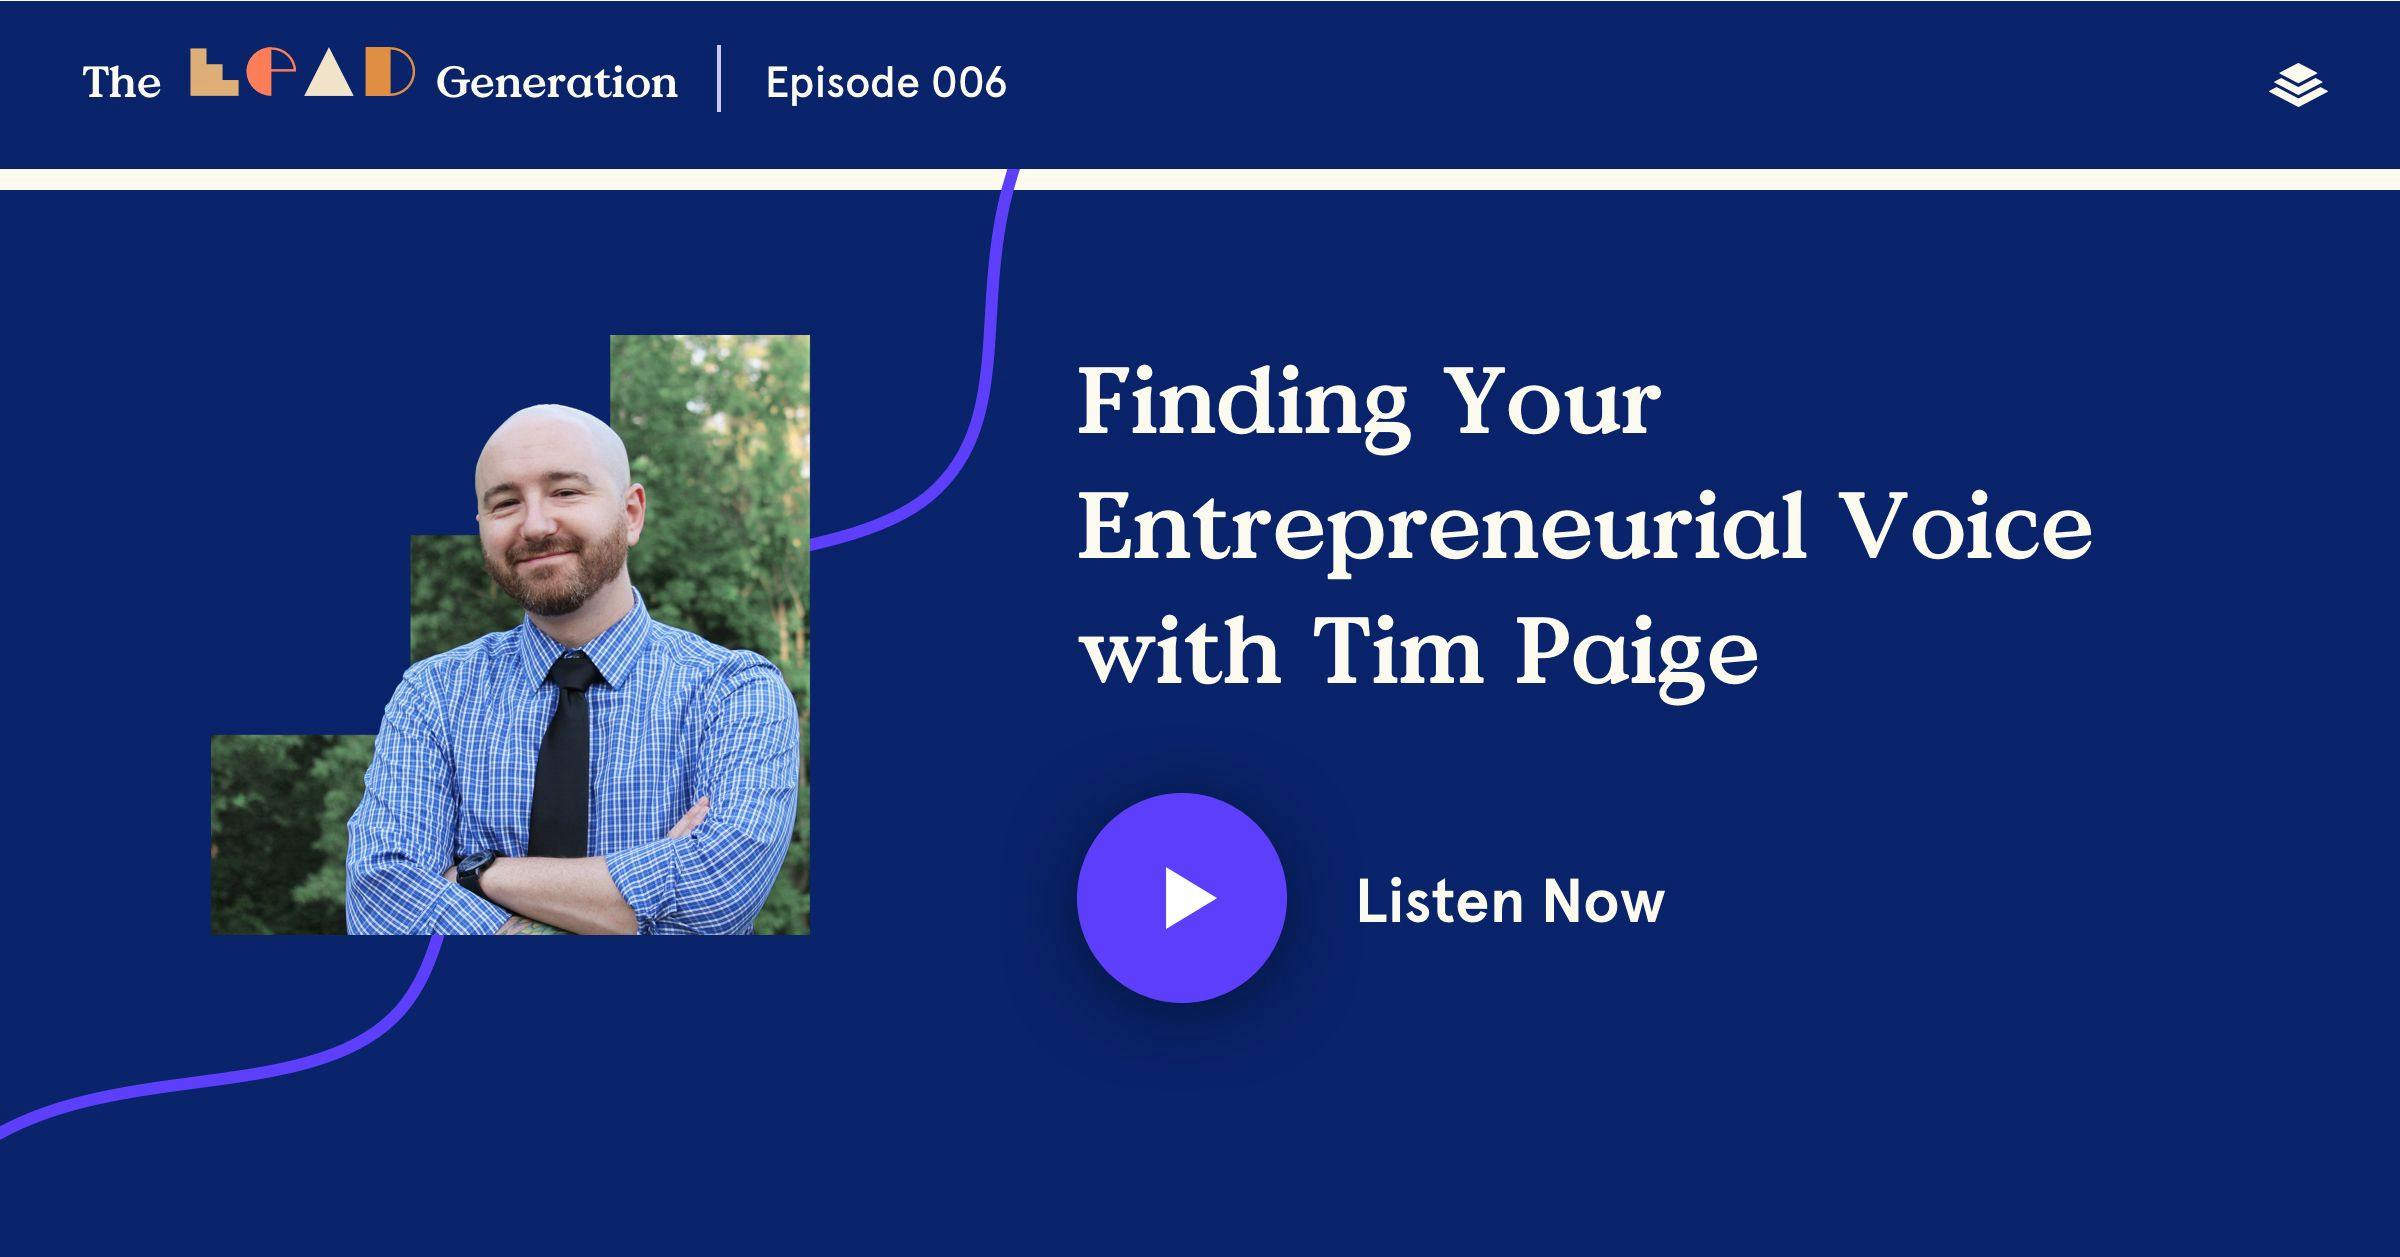 Tim Paige on The Lead Generation